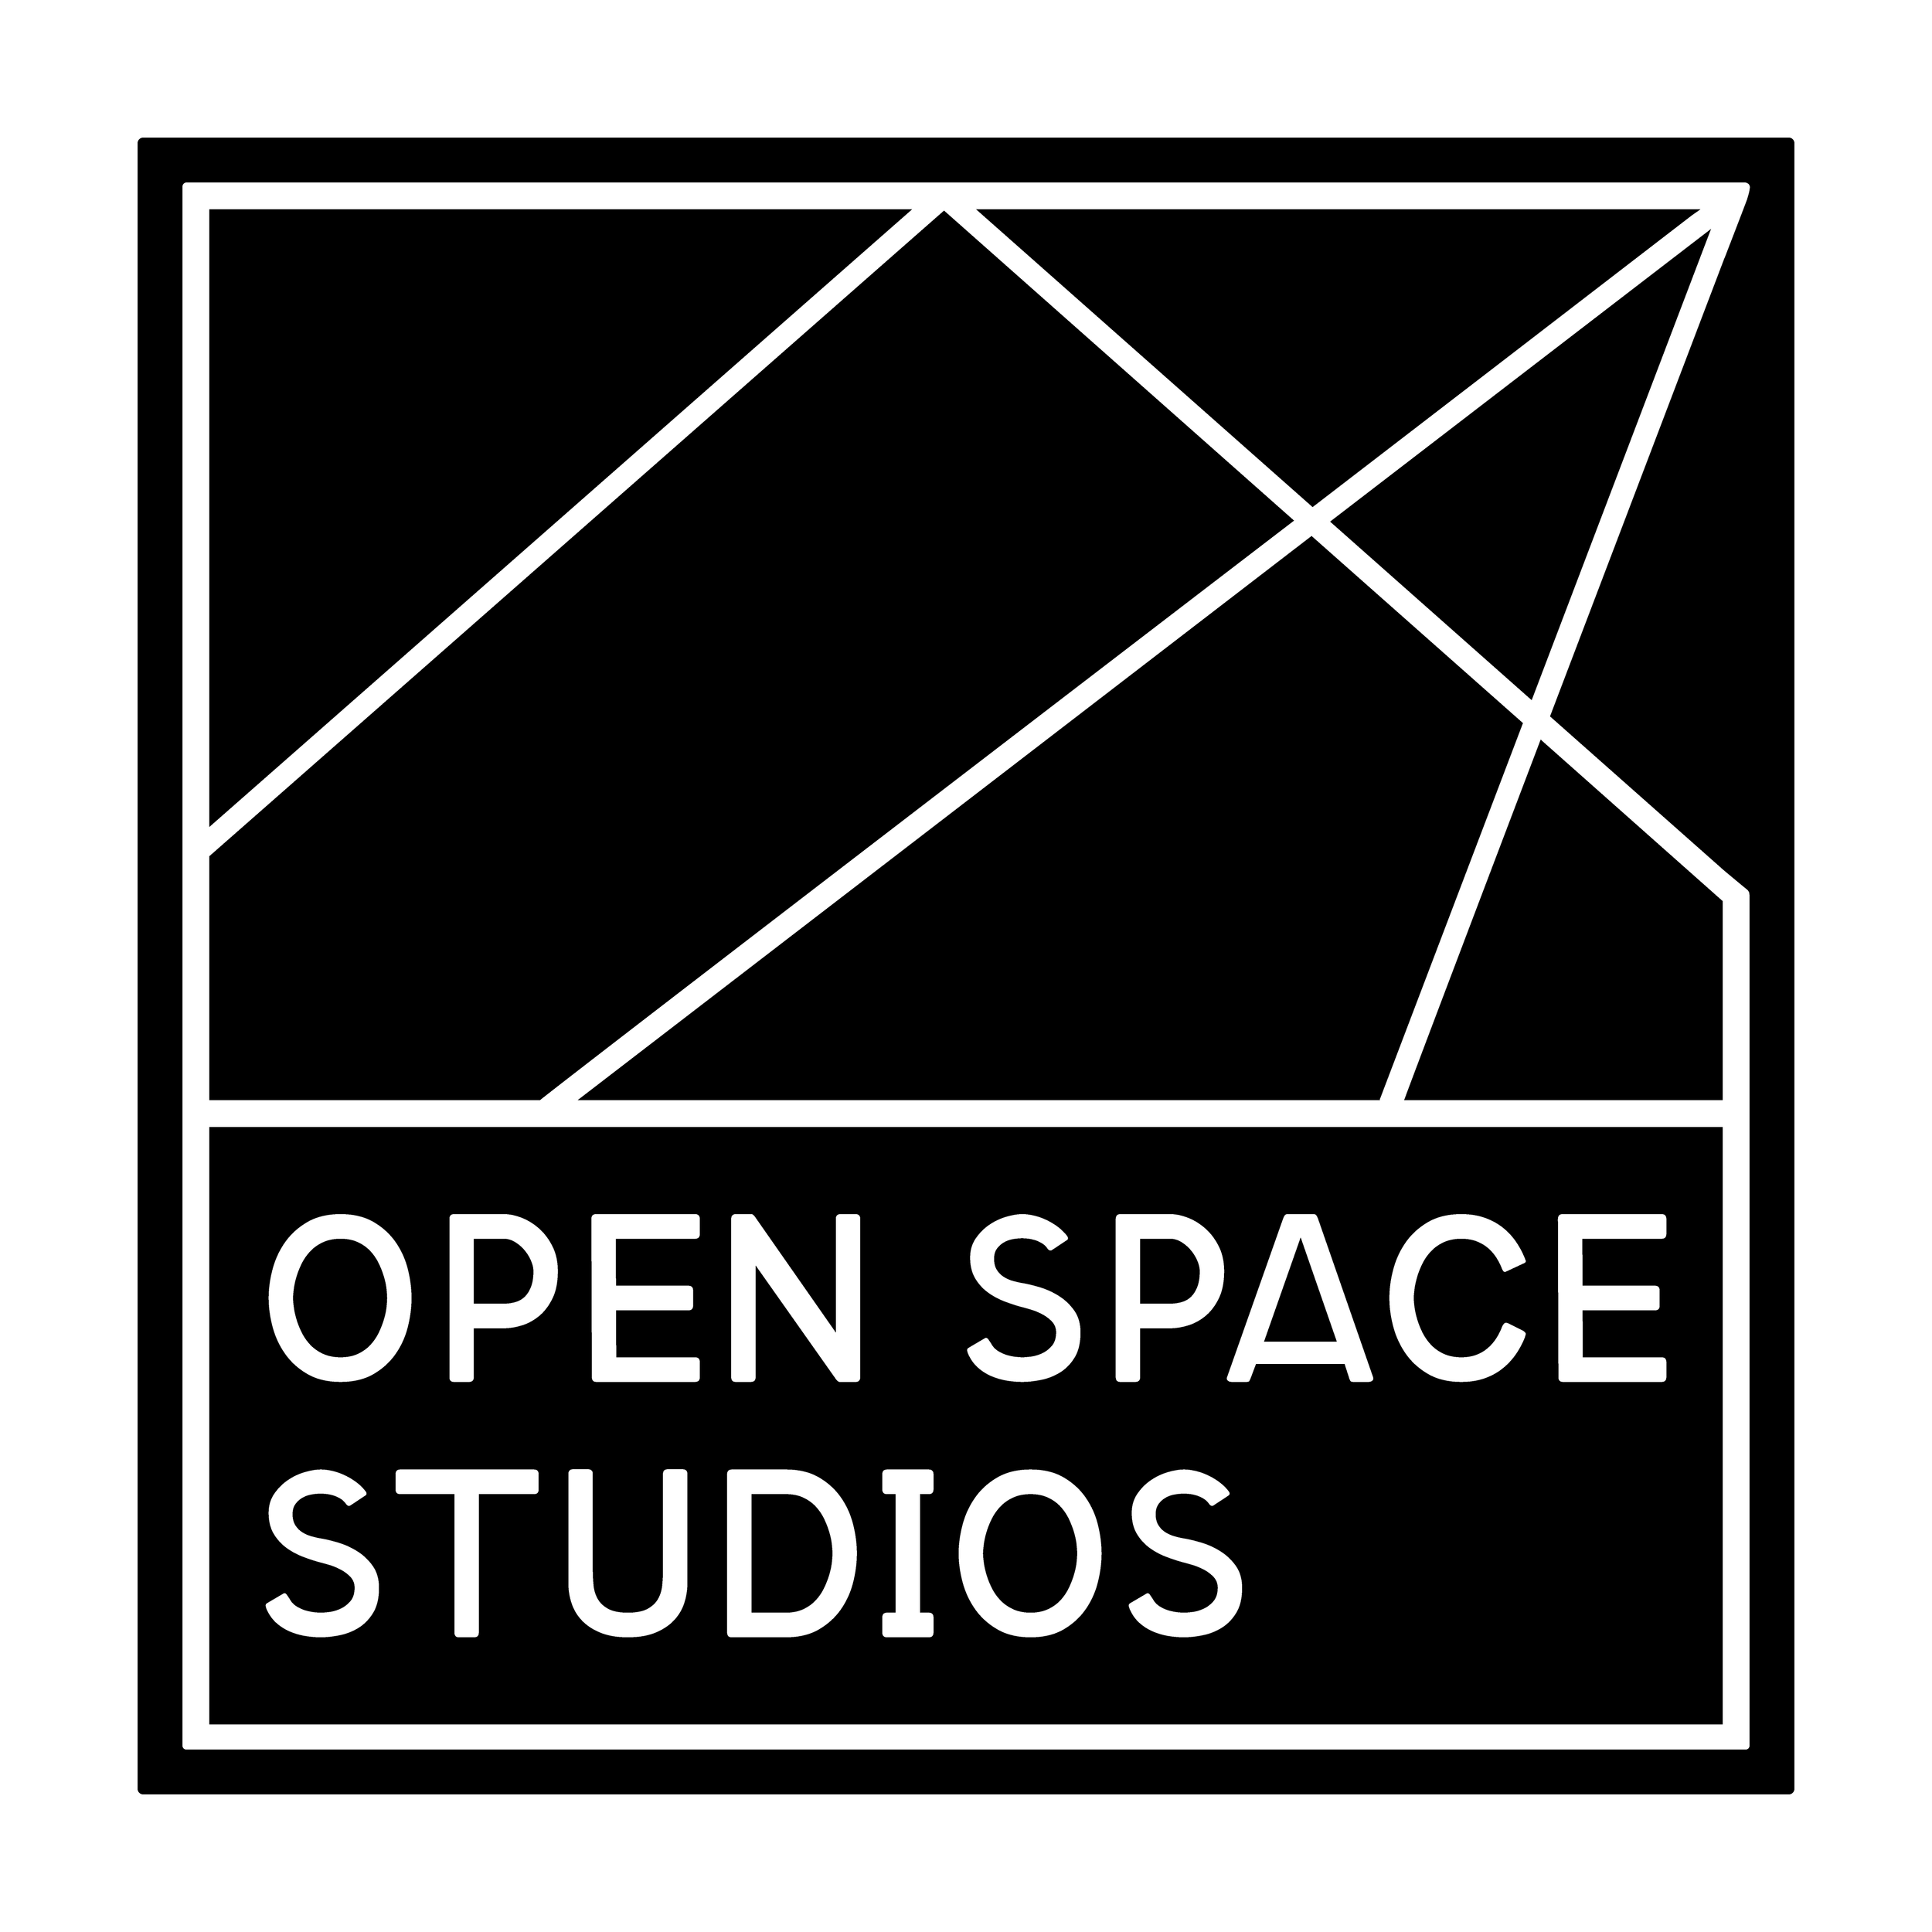 Finals_Open Space Studios - filled square.png